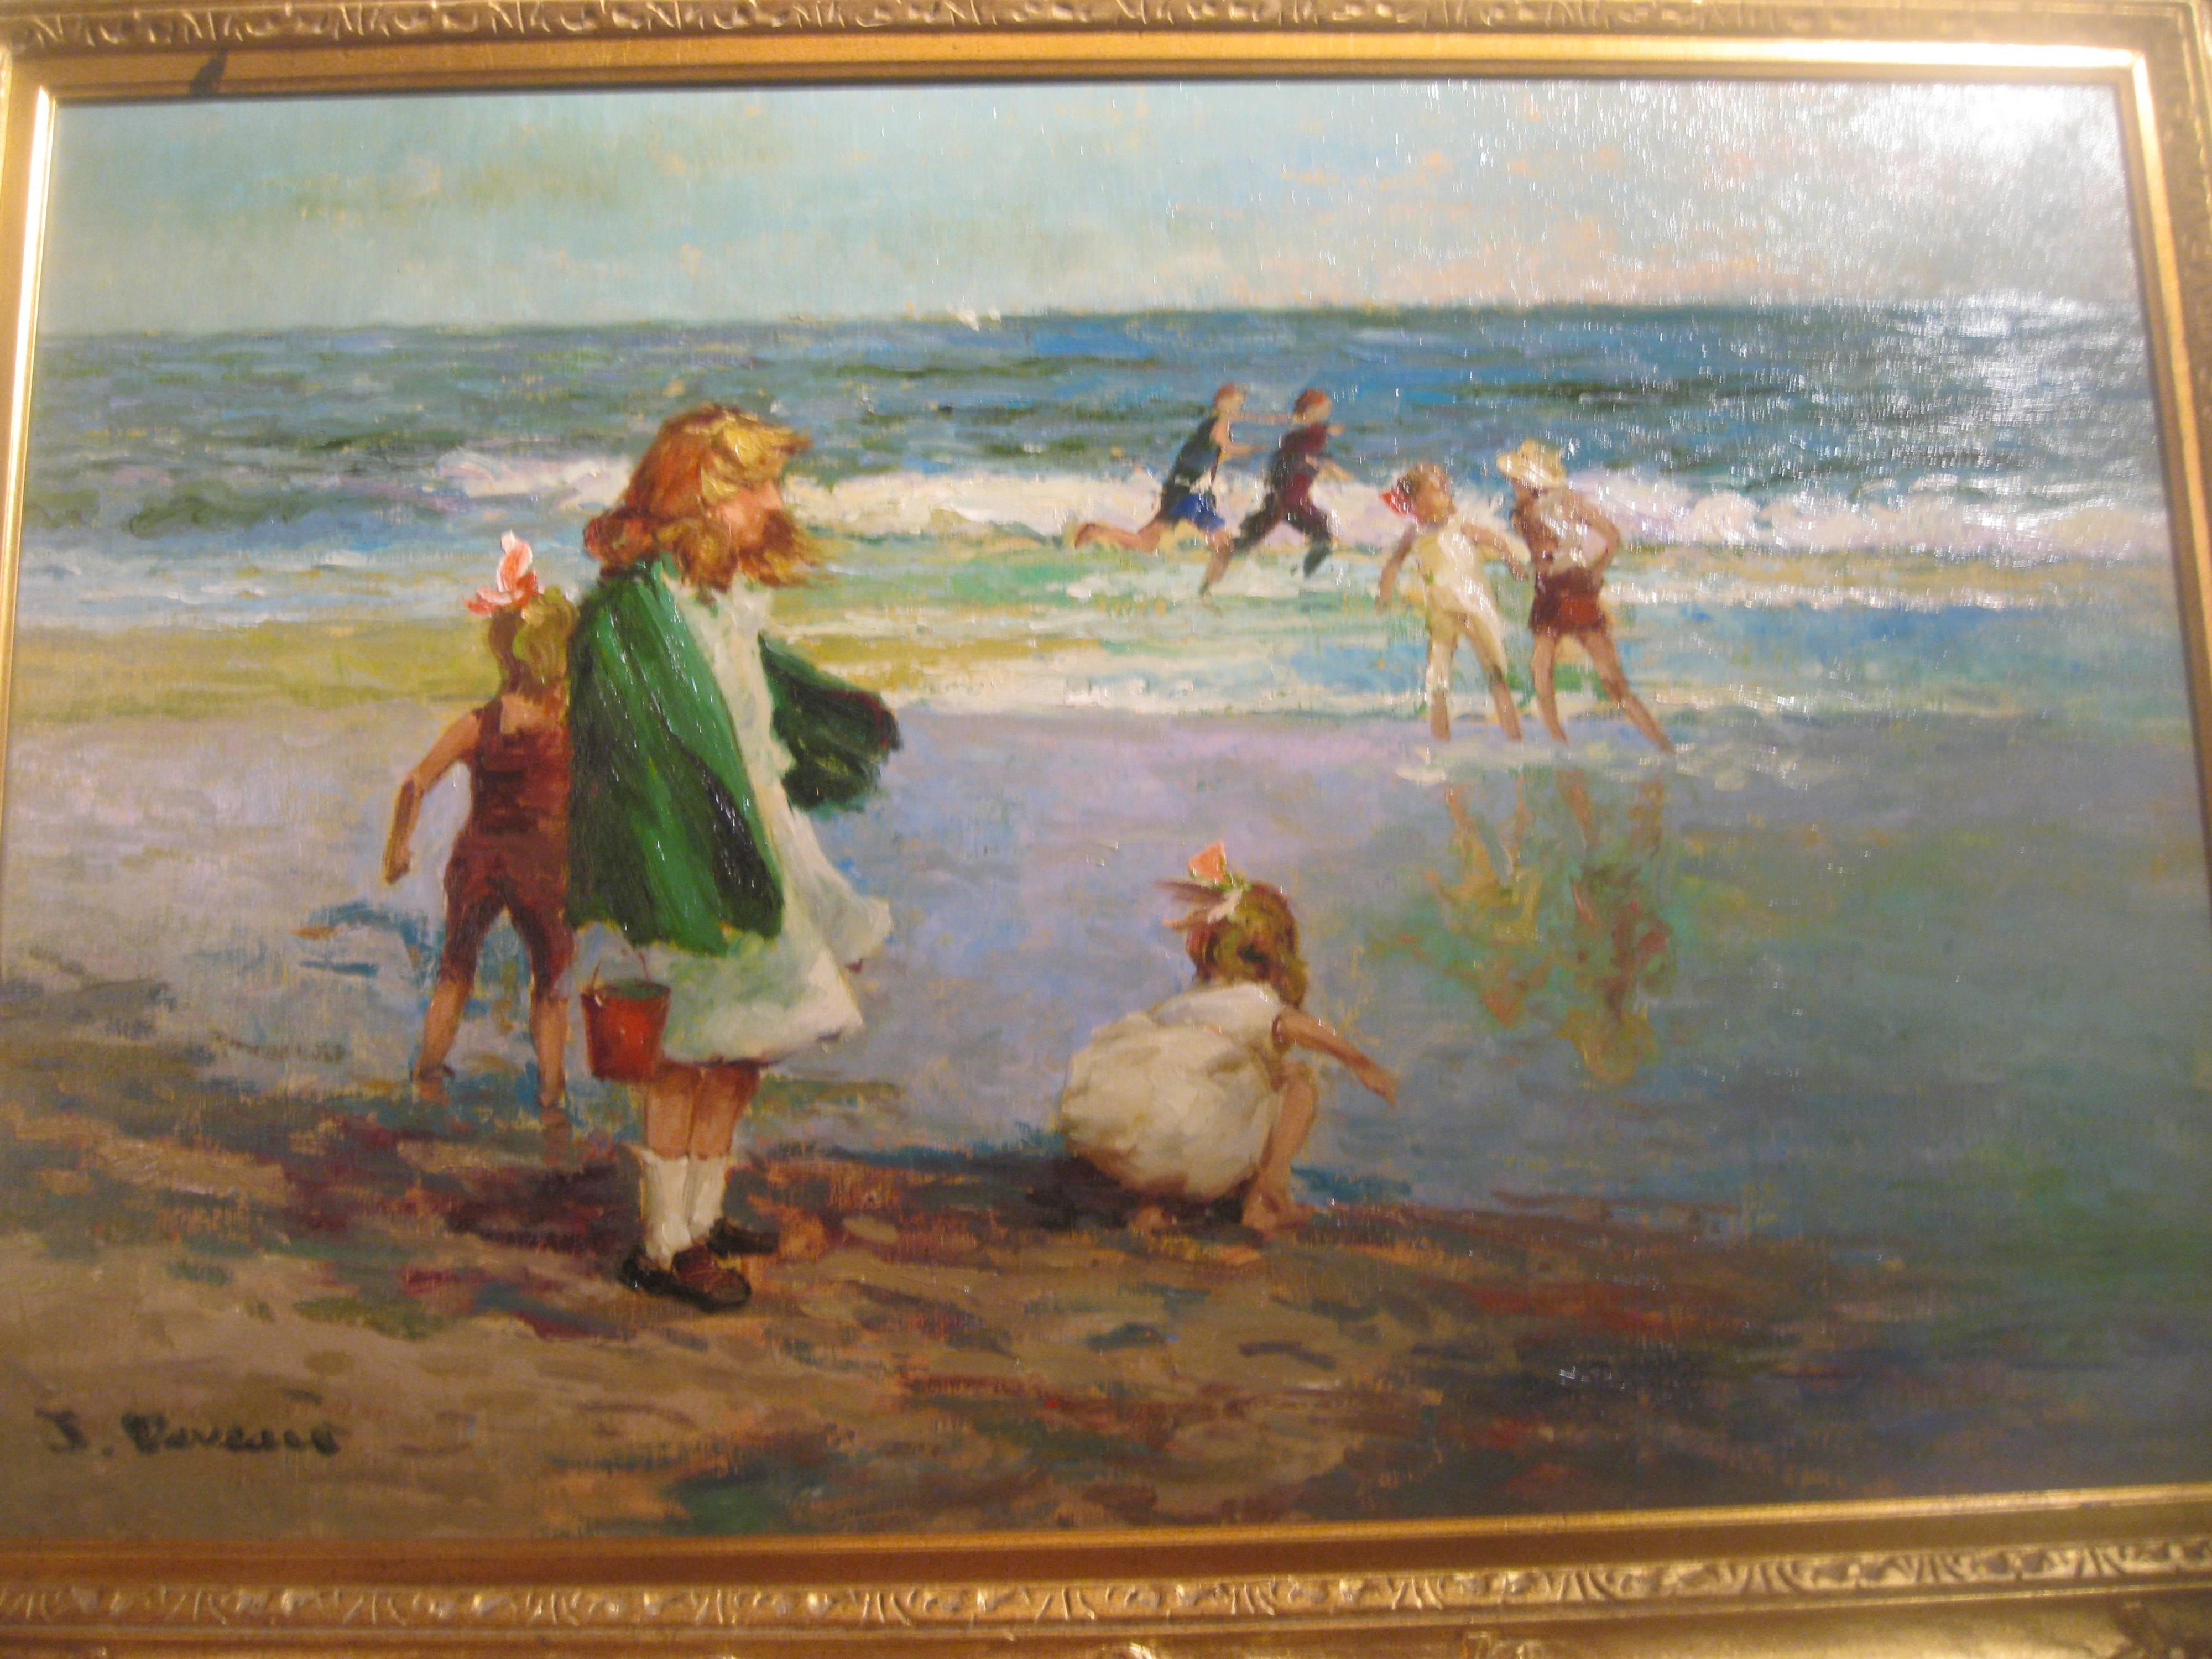 French artist Jacques Deveau is a French Contemporary artist that paints in the Impressionist style.  He is known for painting beach scenes and landscapes.
A favorite theme is beautiful women and children.

He is represented internationally in